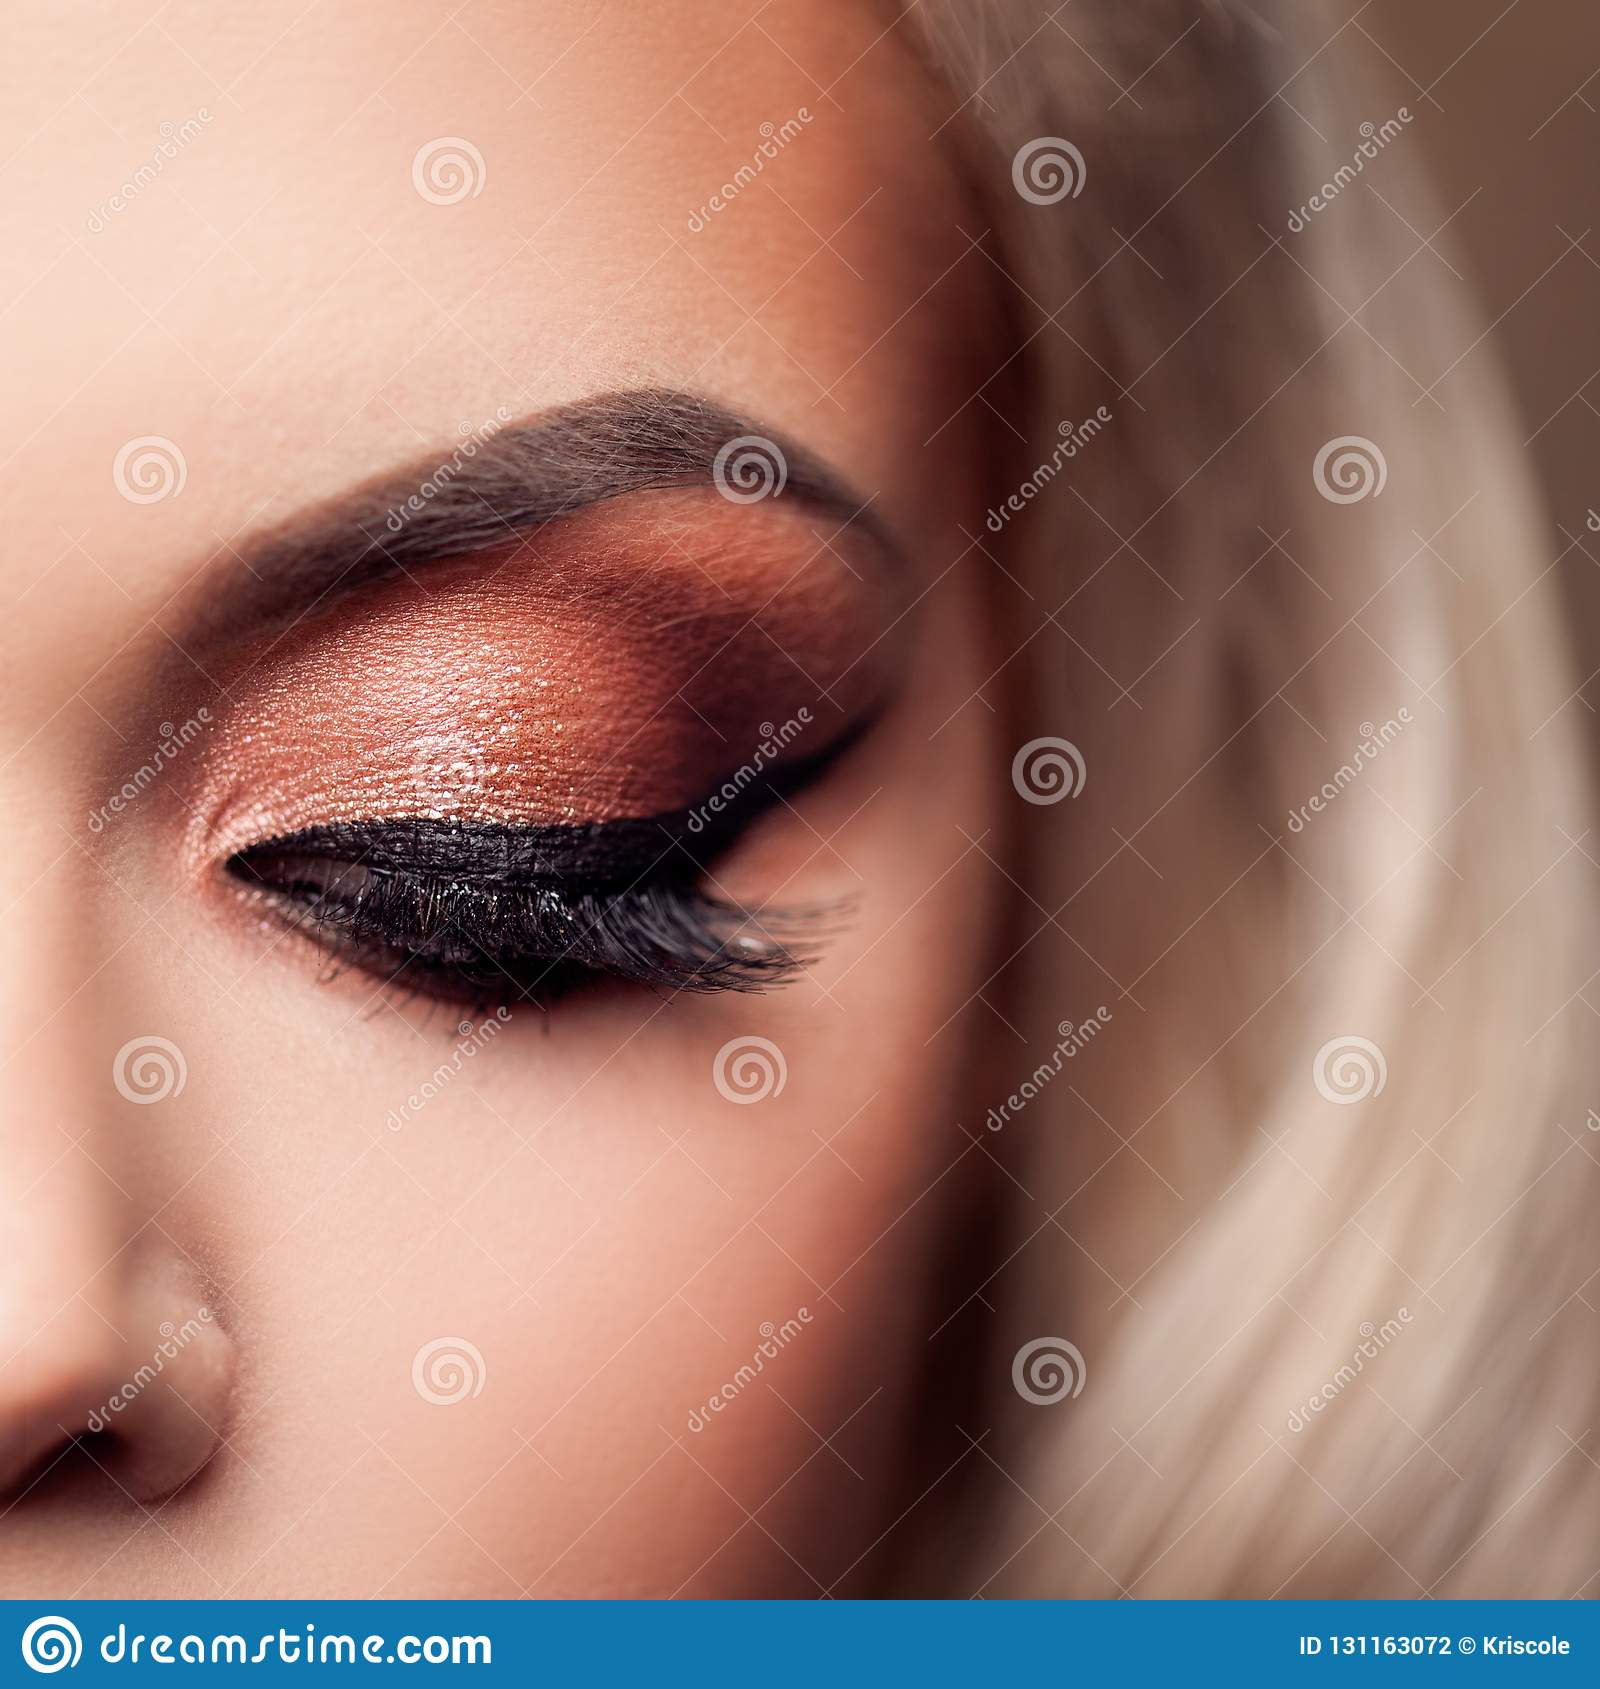 Eye Makeup Evening Female Eye With Evening Makeup Bright Makeup Eye Shadow And Lashes